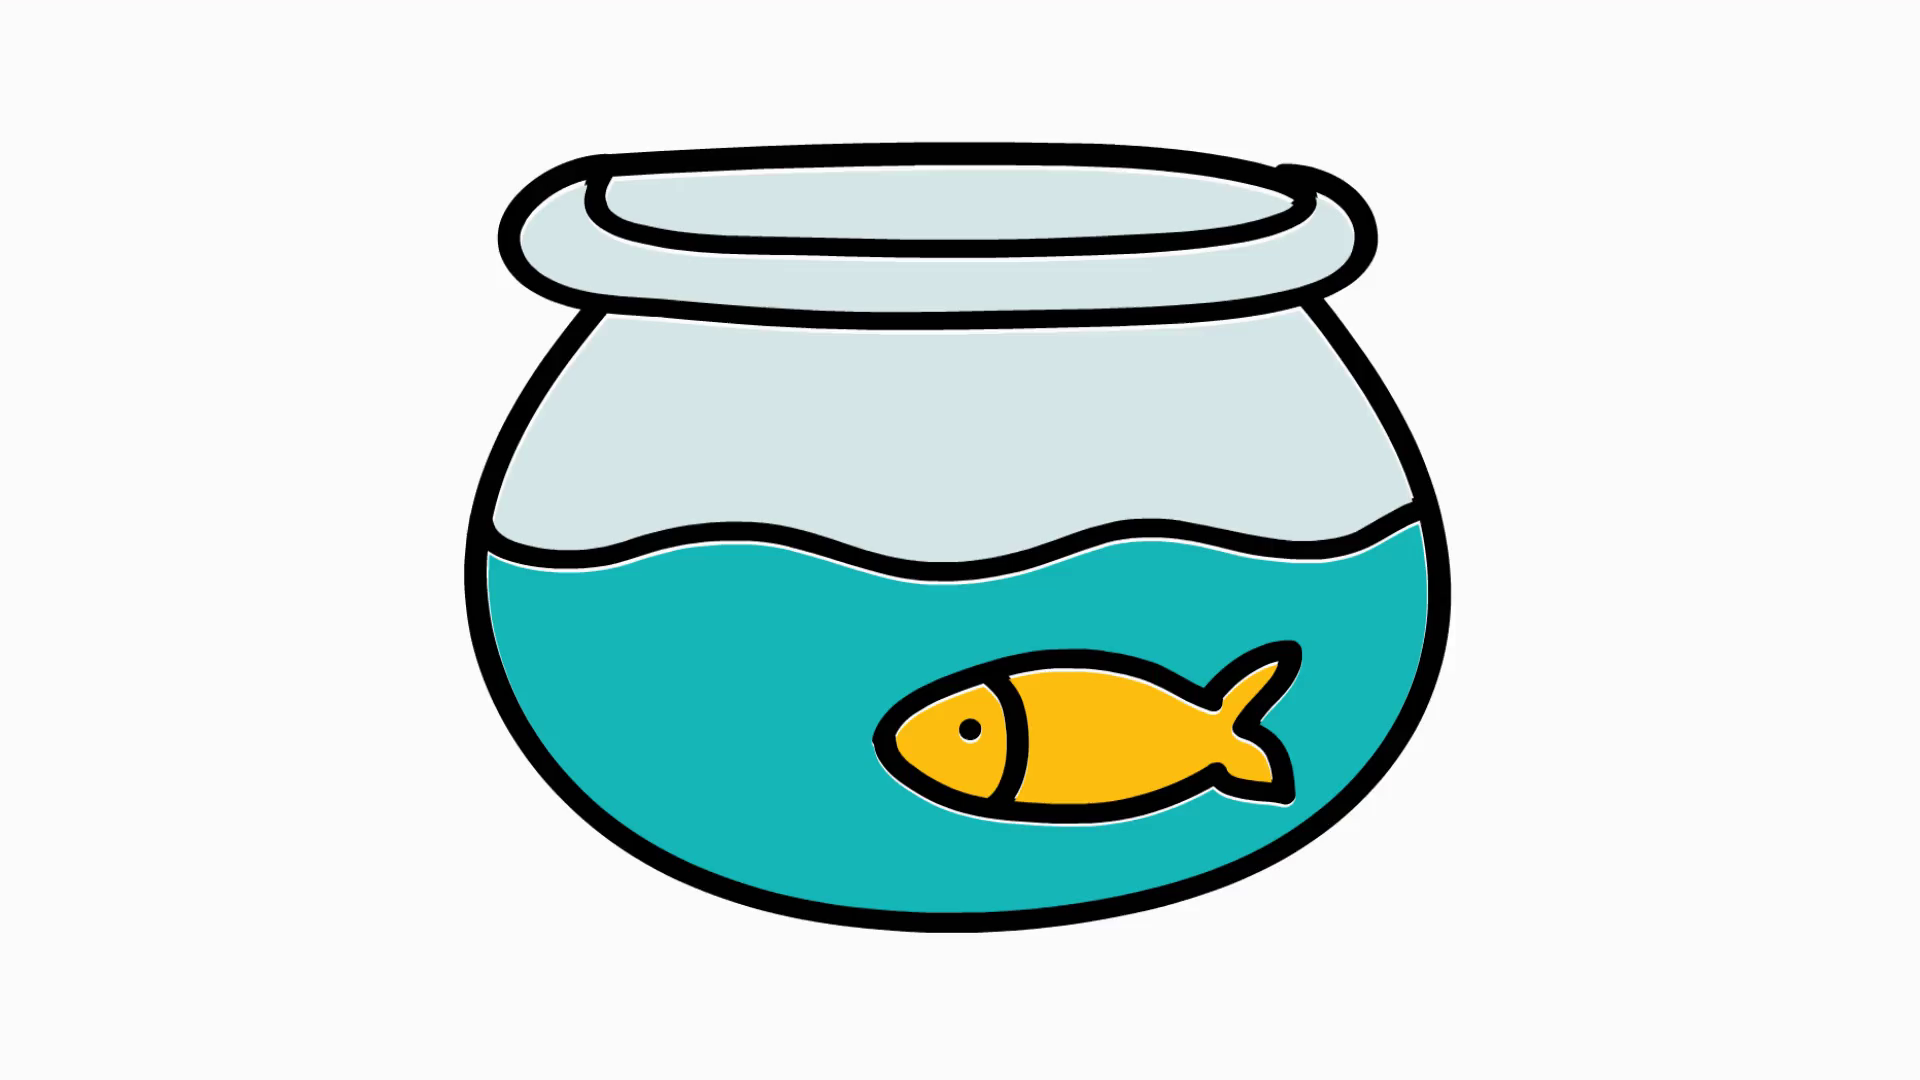 Bowl clipart animated. Fish hand drawn icon